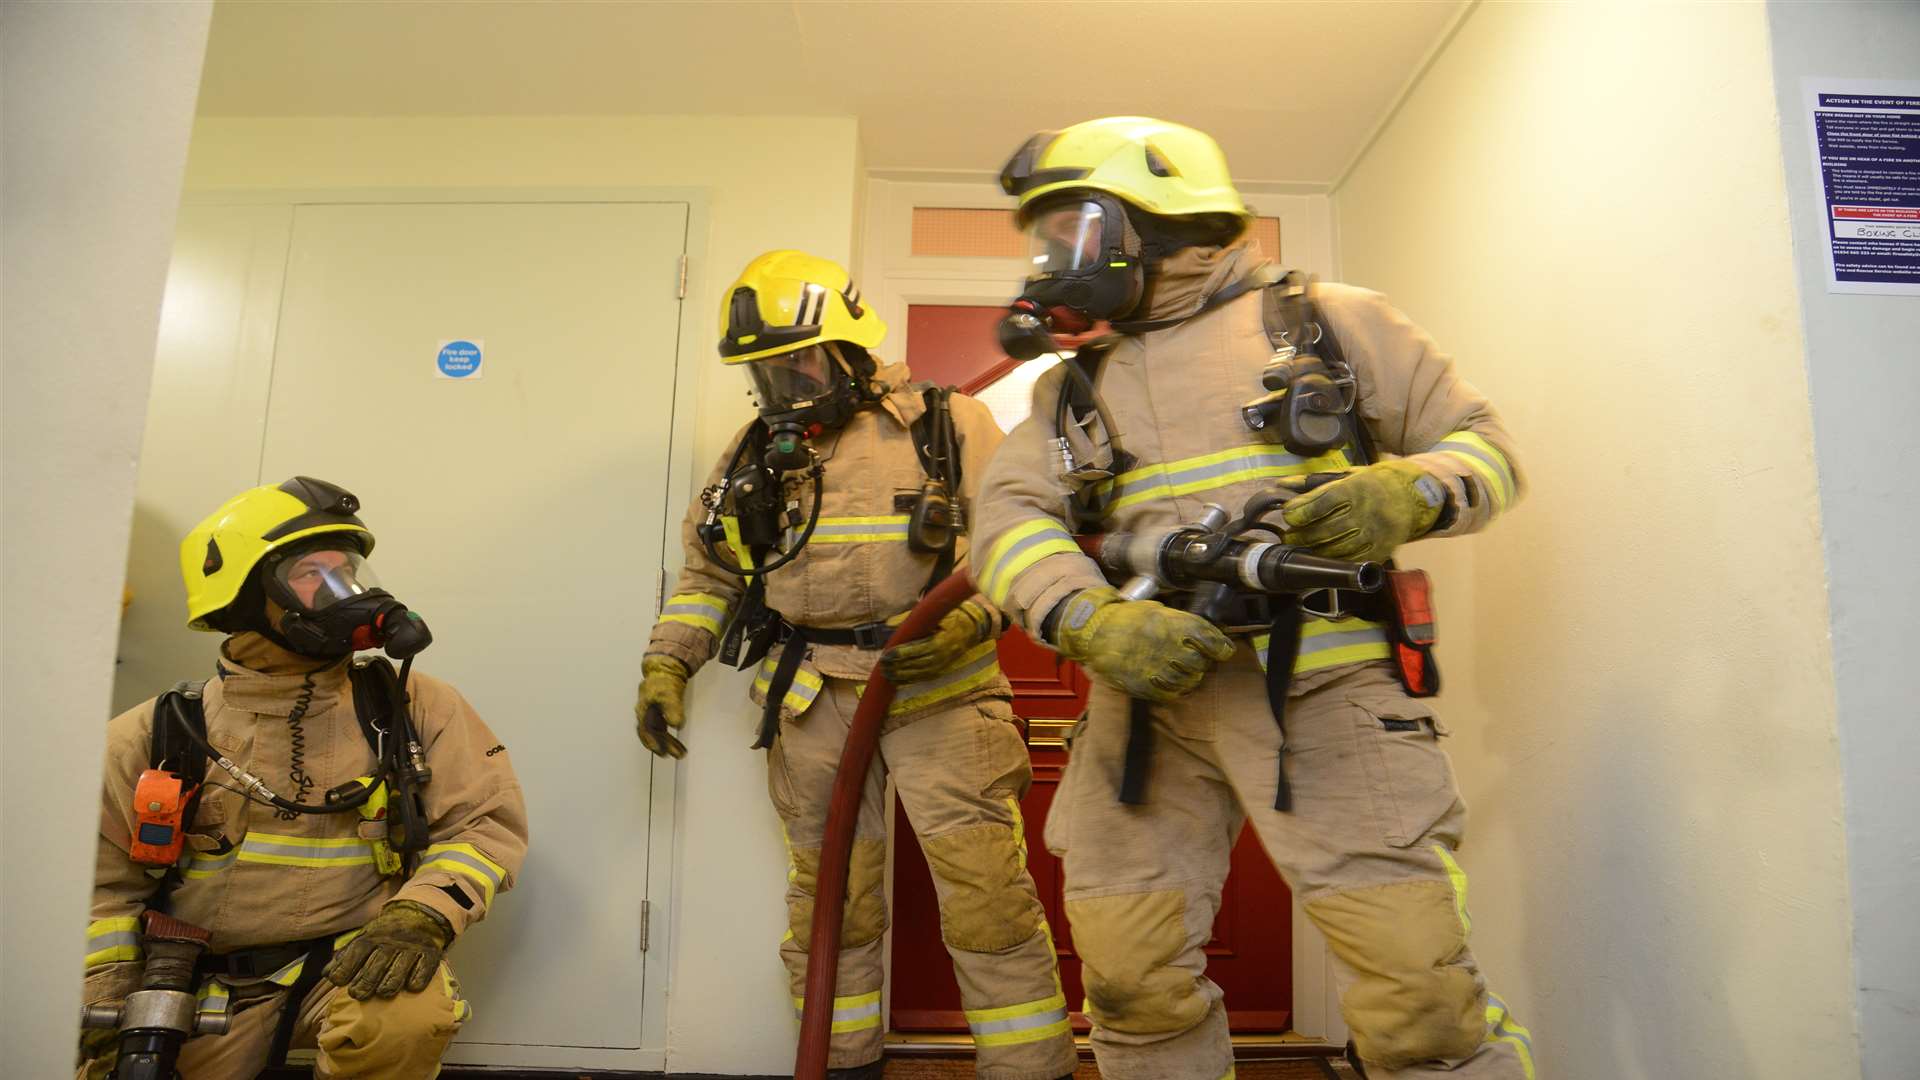 Crews with breathing apparatus in action on the 14th floor.